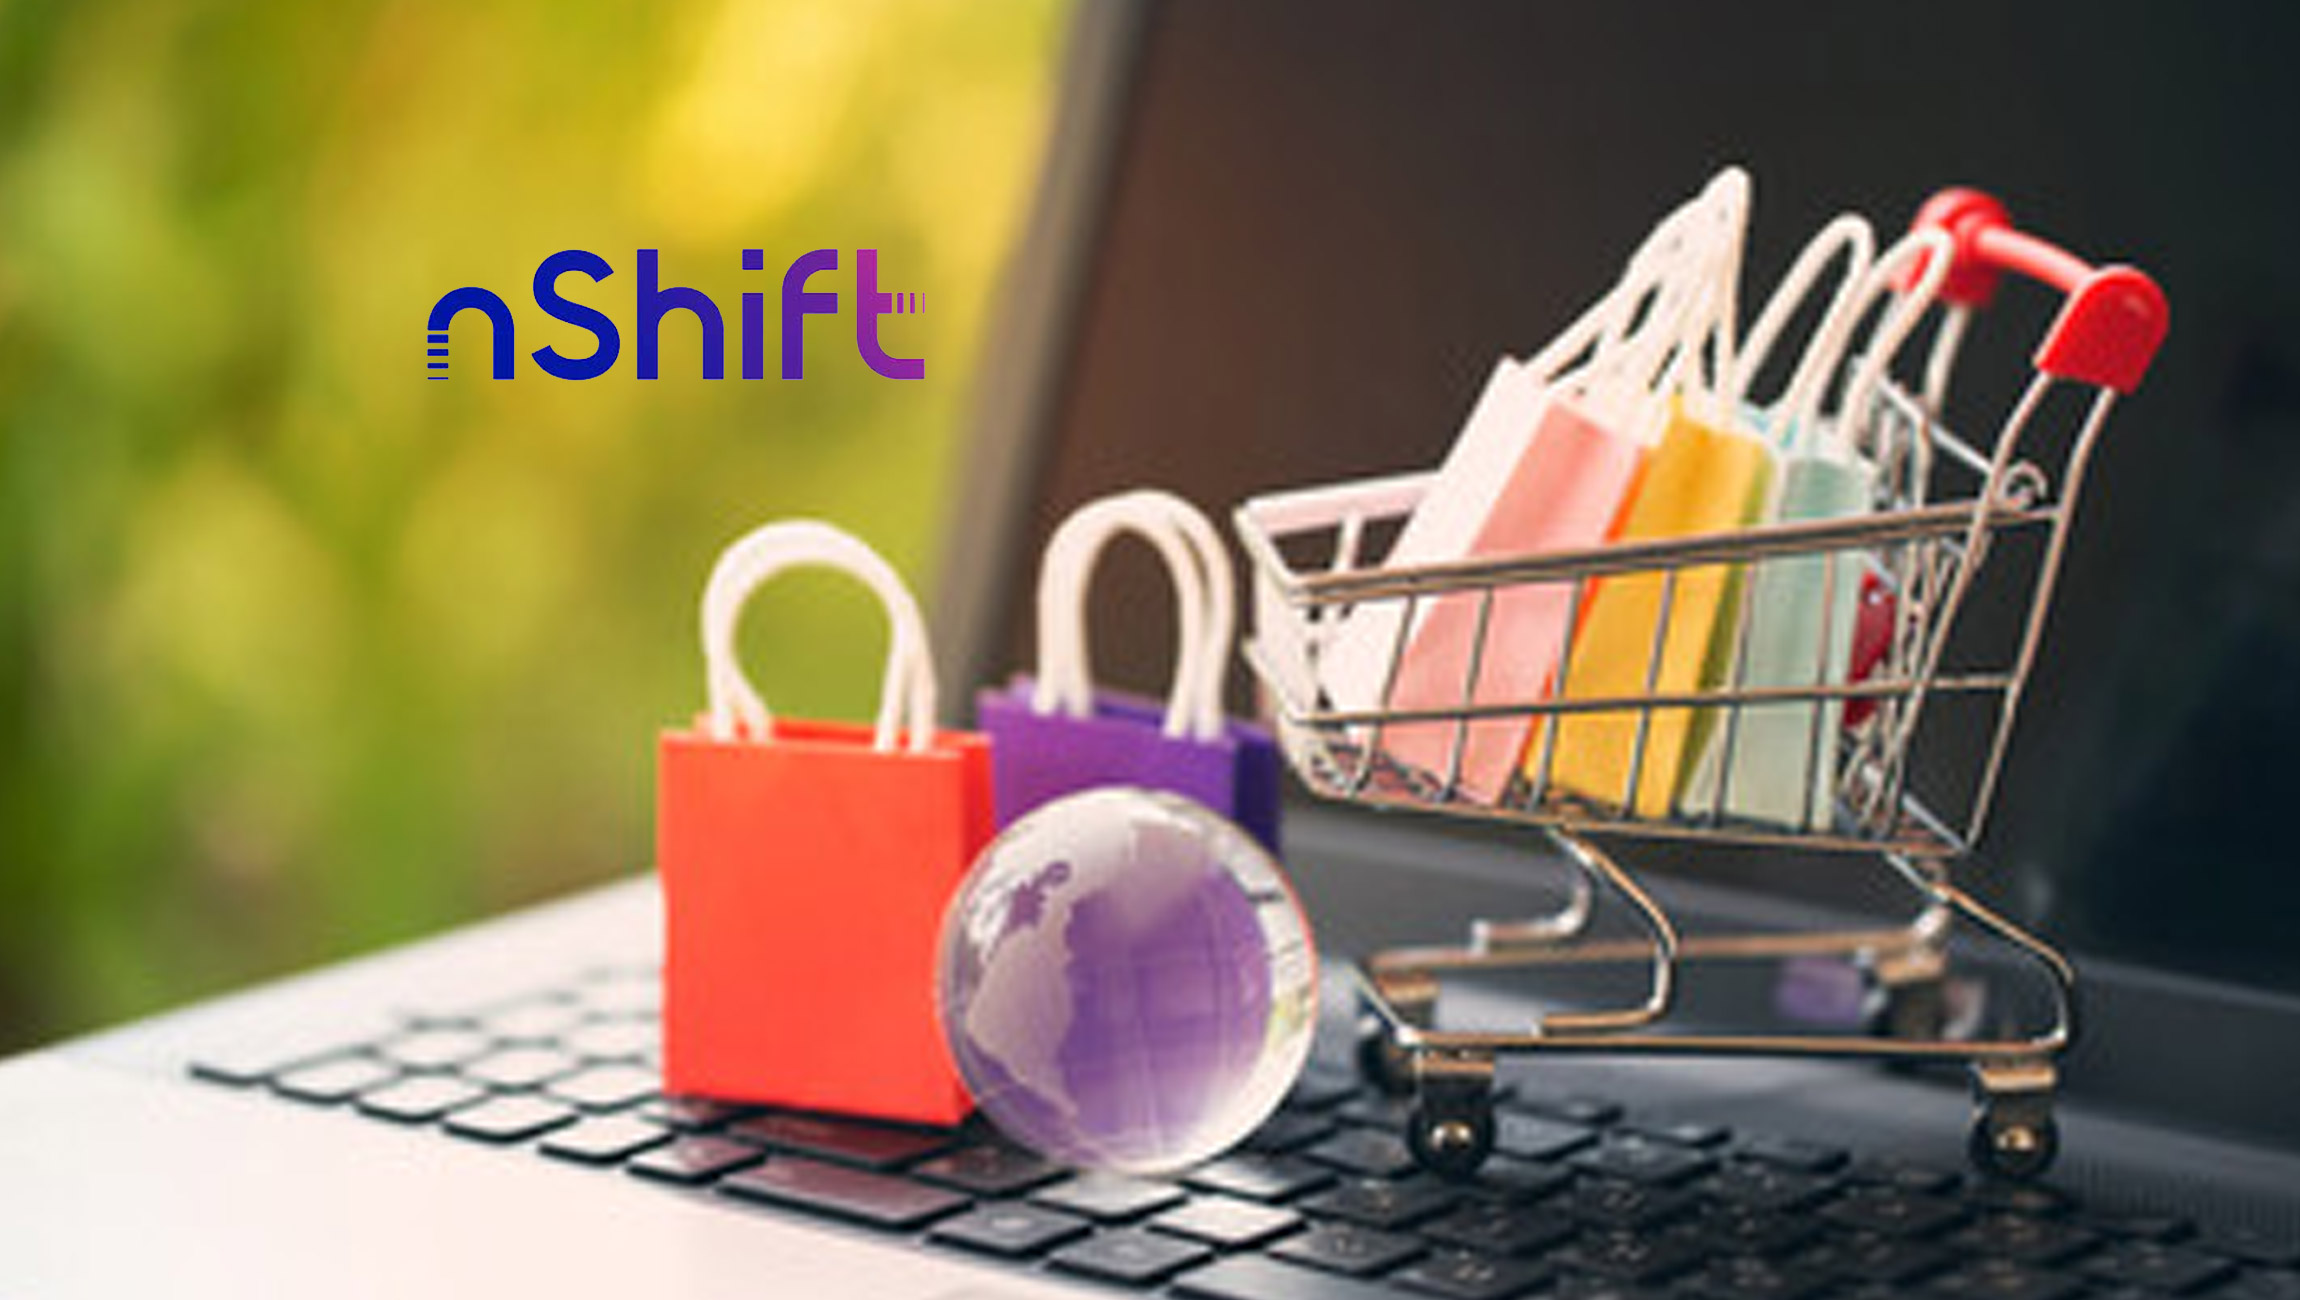 nShift Significantly Expands Post-purchase Options for Merchants With nShift Track